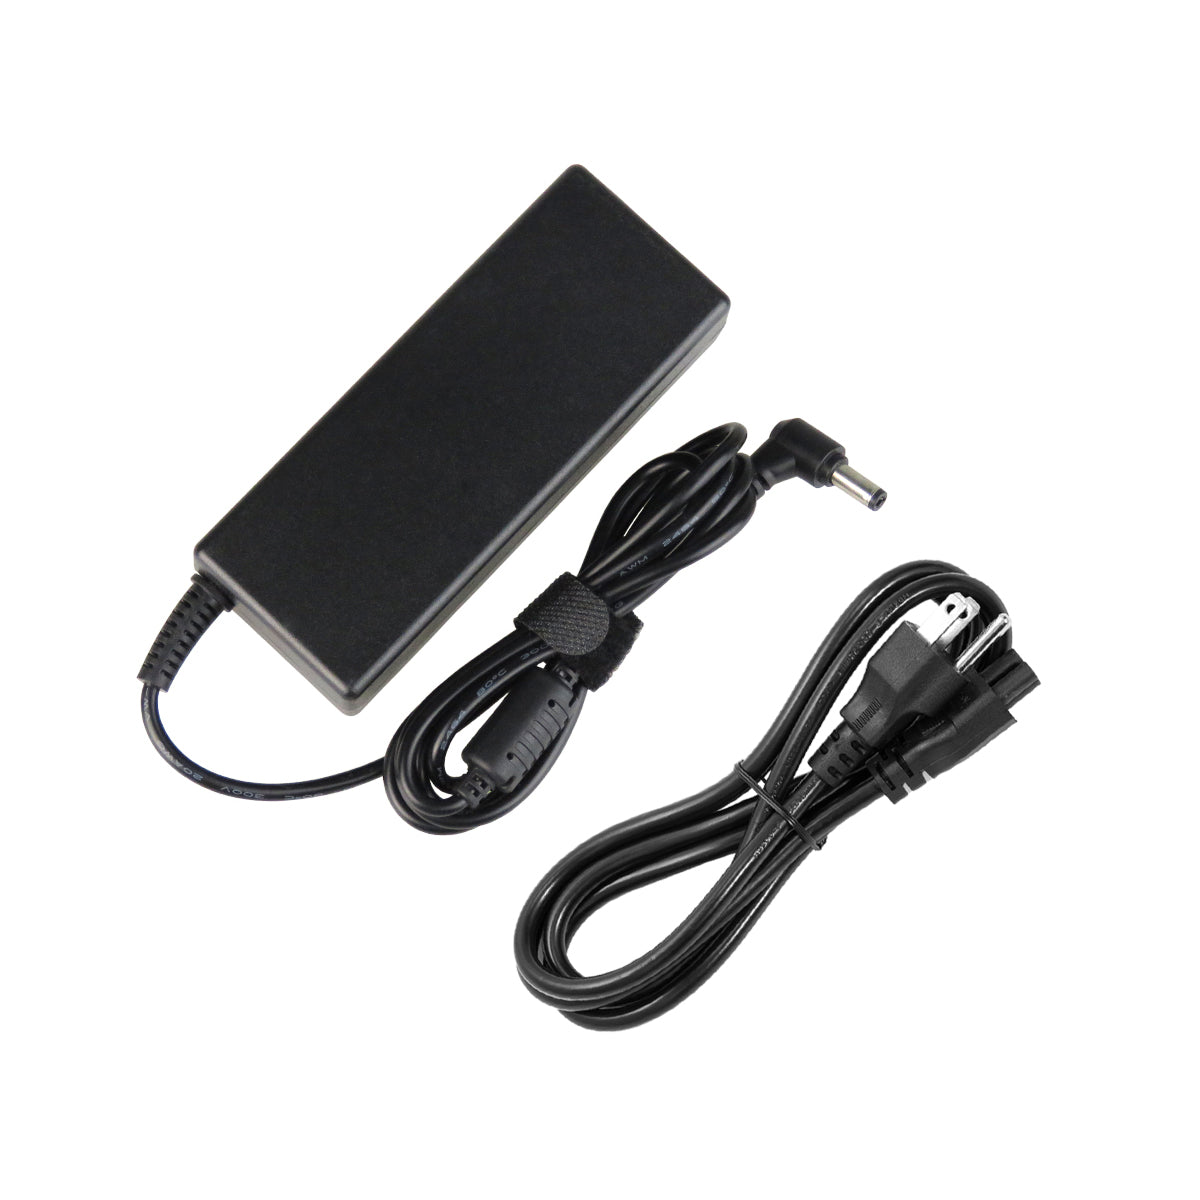 AC Adapter Charger for Gateway M-150 Notebook.